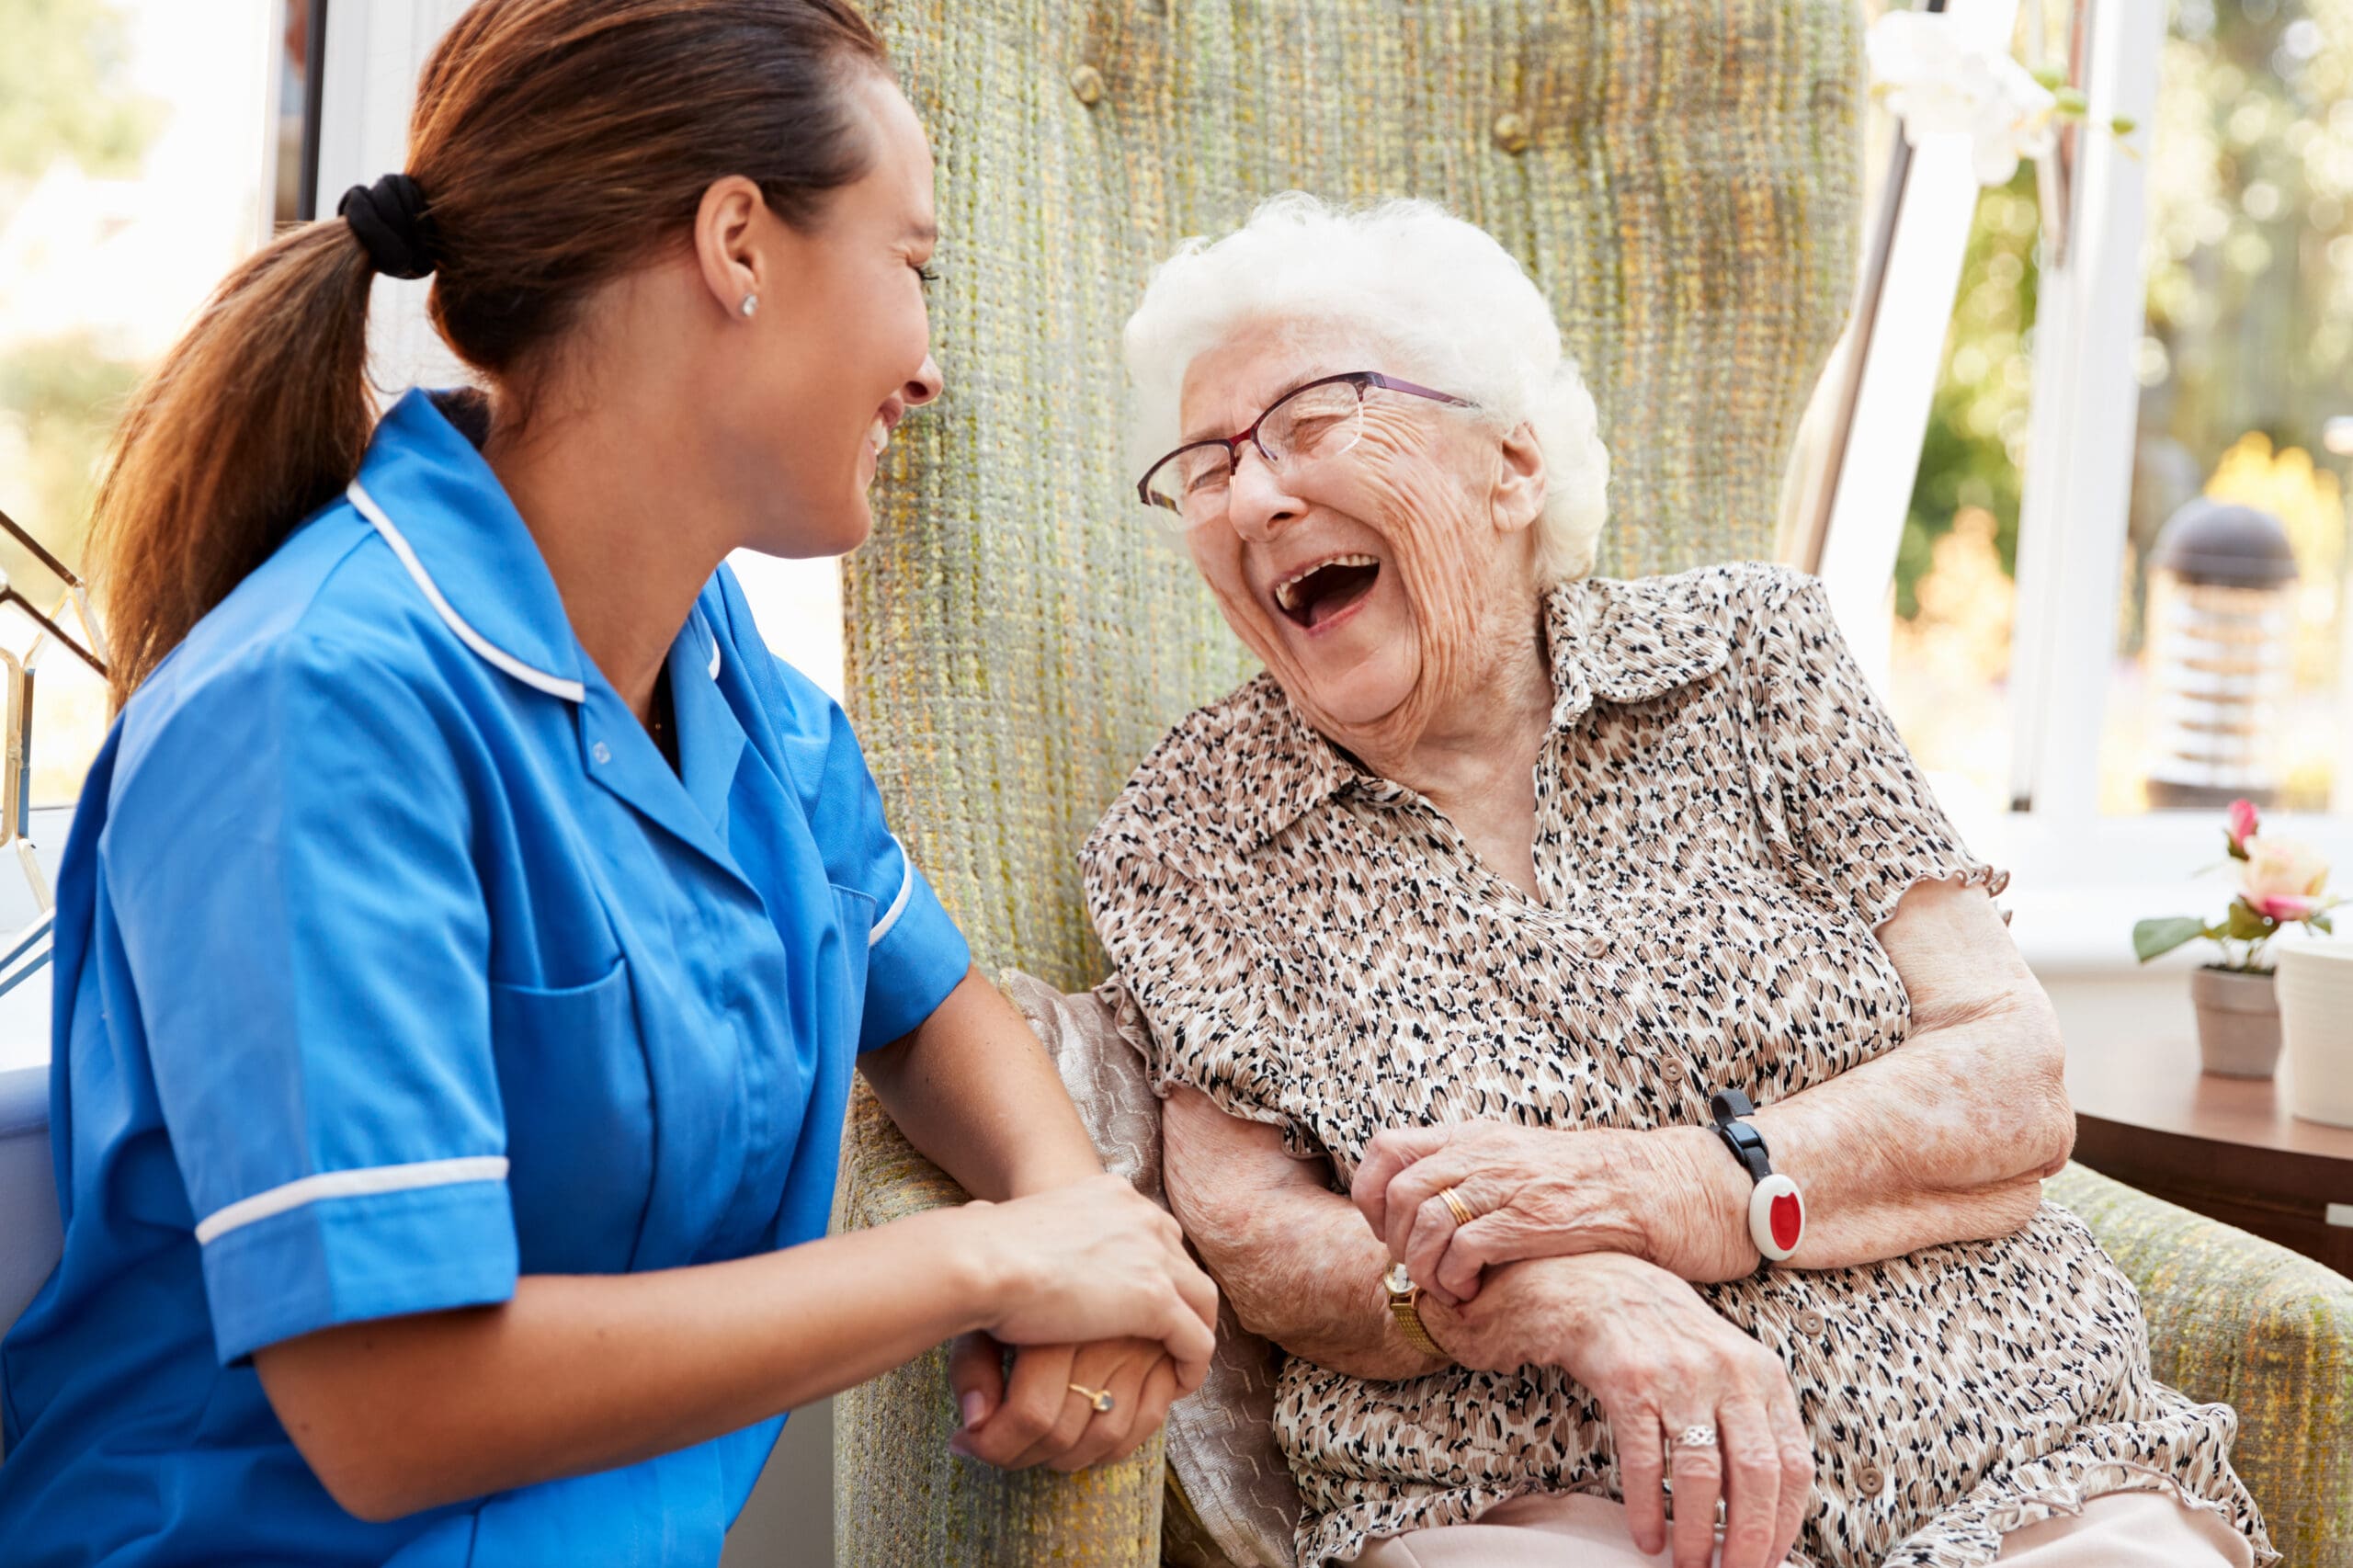 A carer and client laugh together